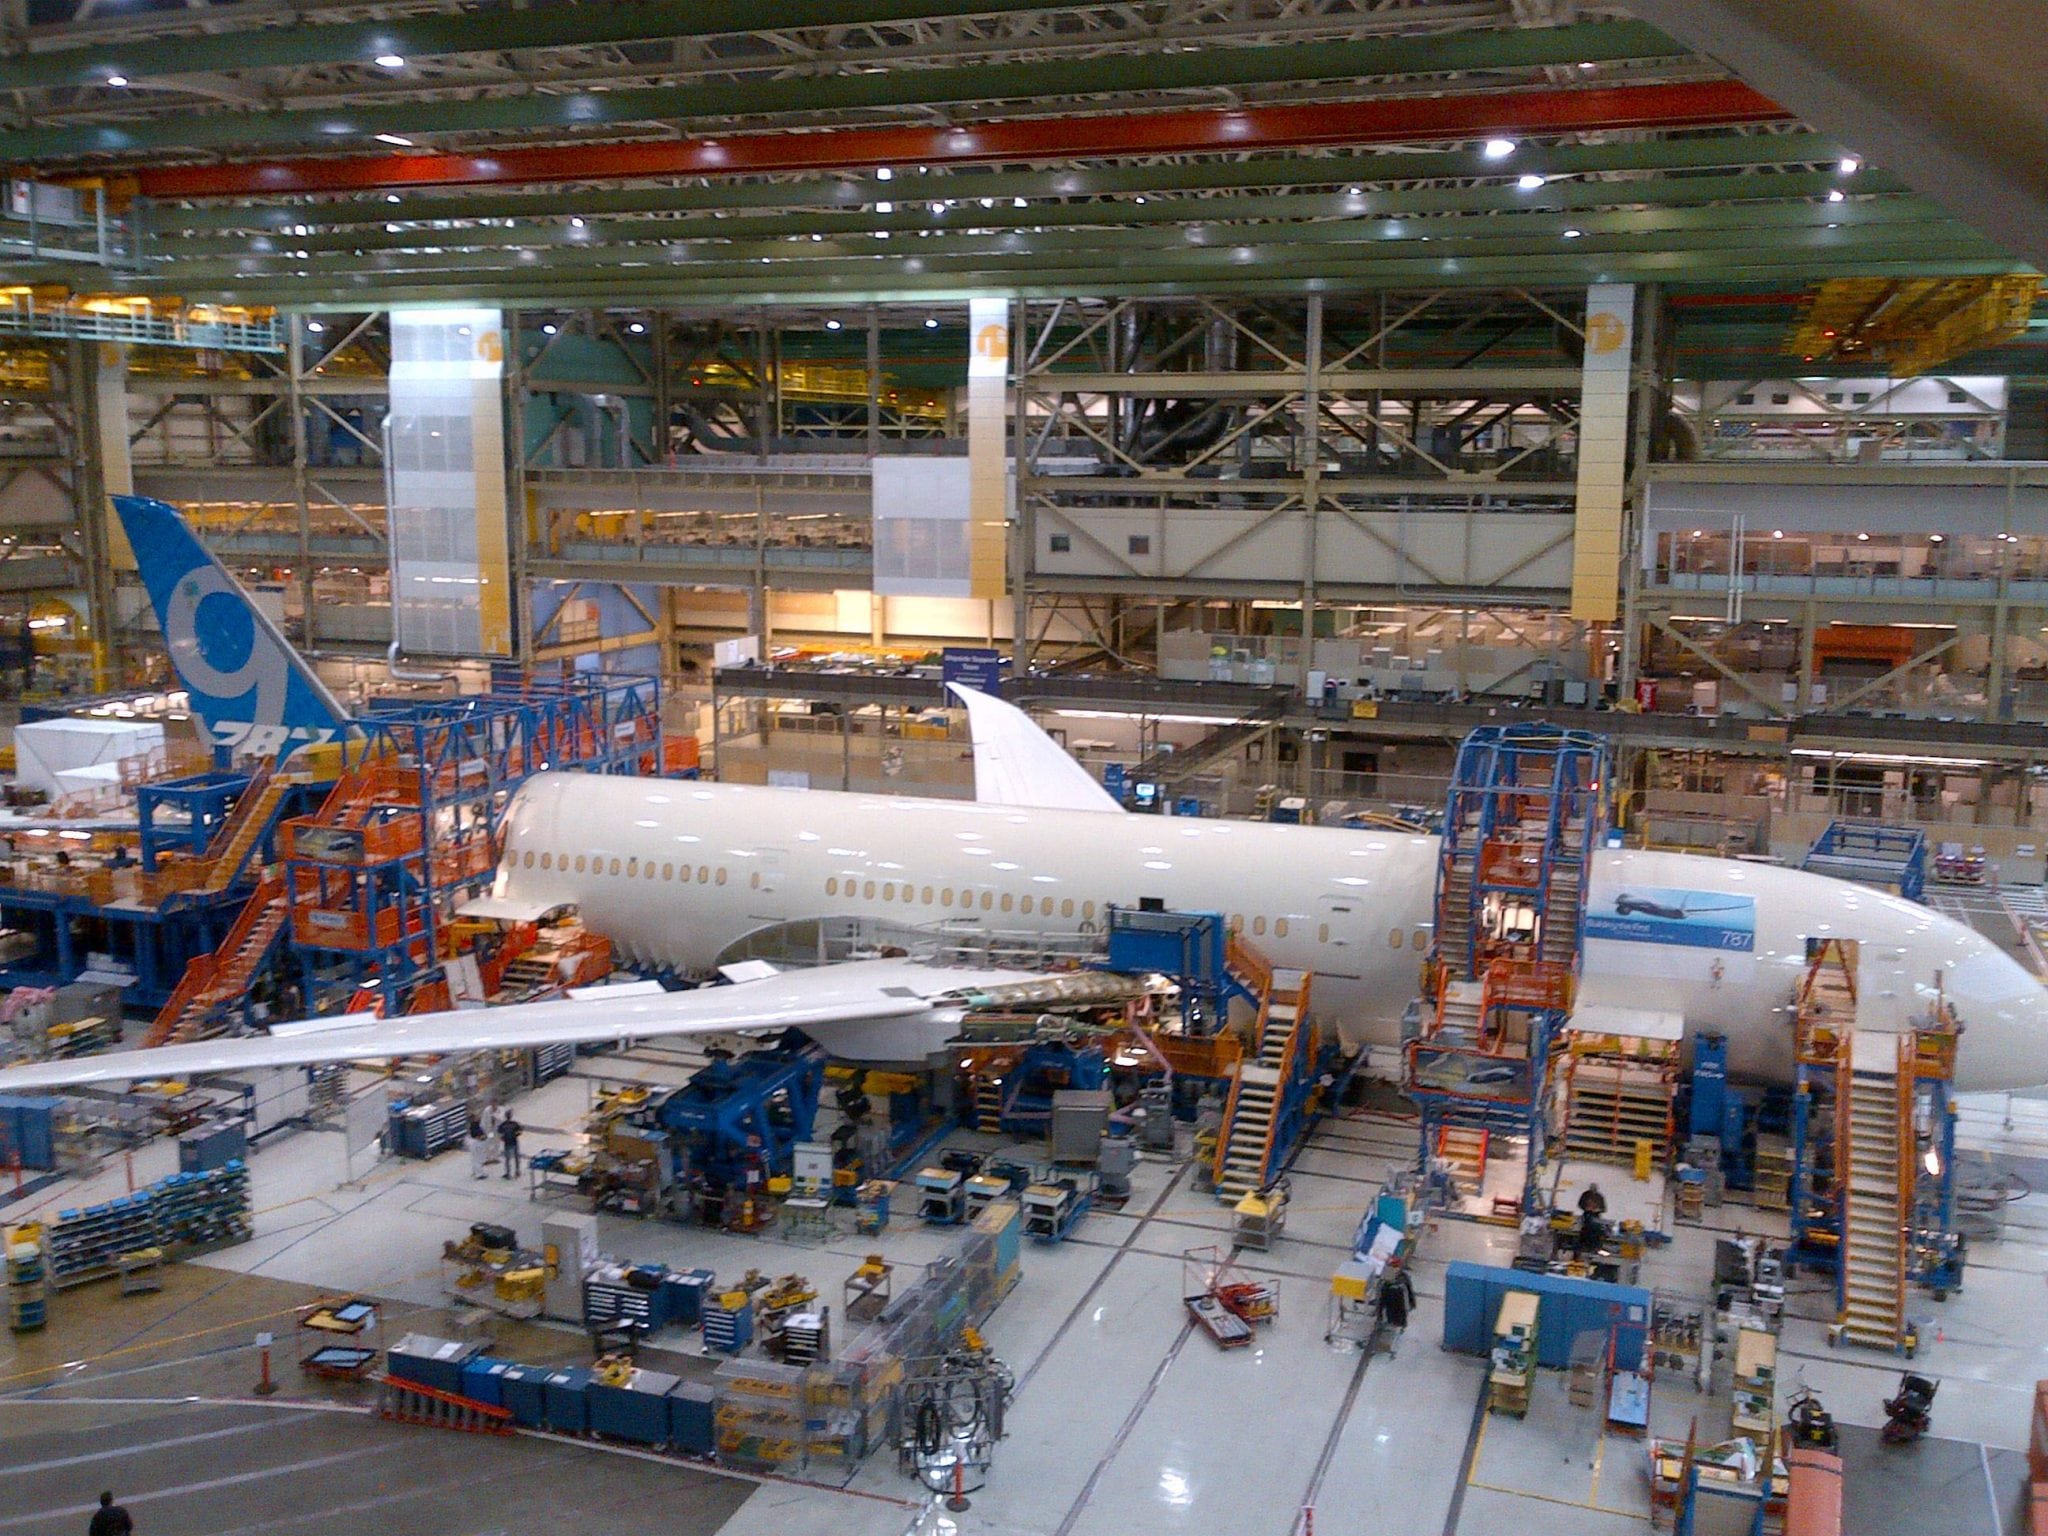 Boeing has reported 762 commercial airplane deliveries in 2015